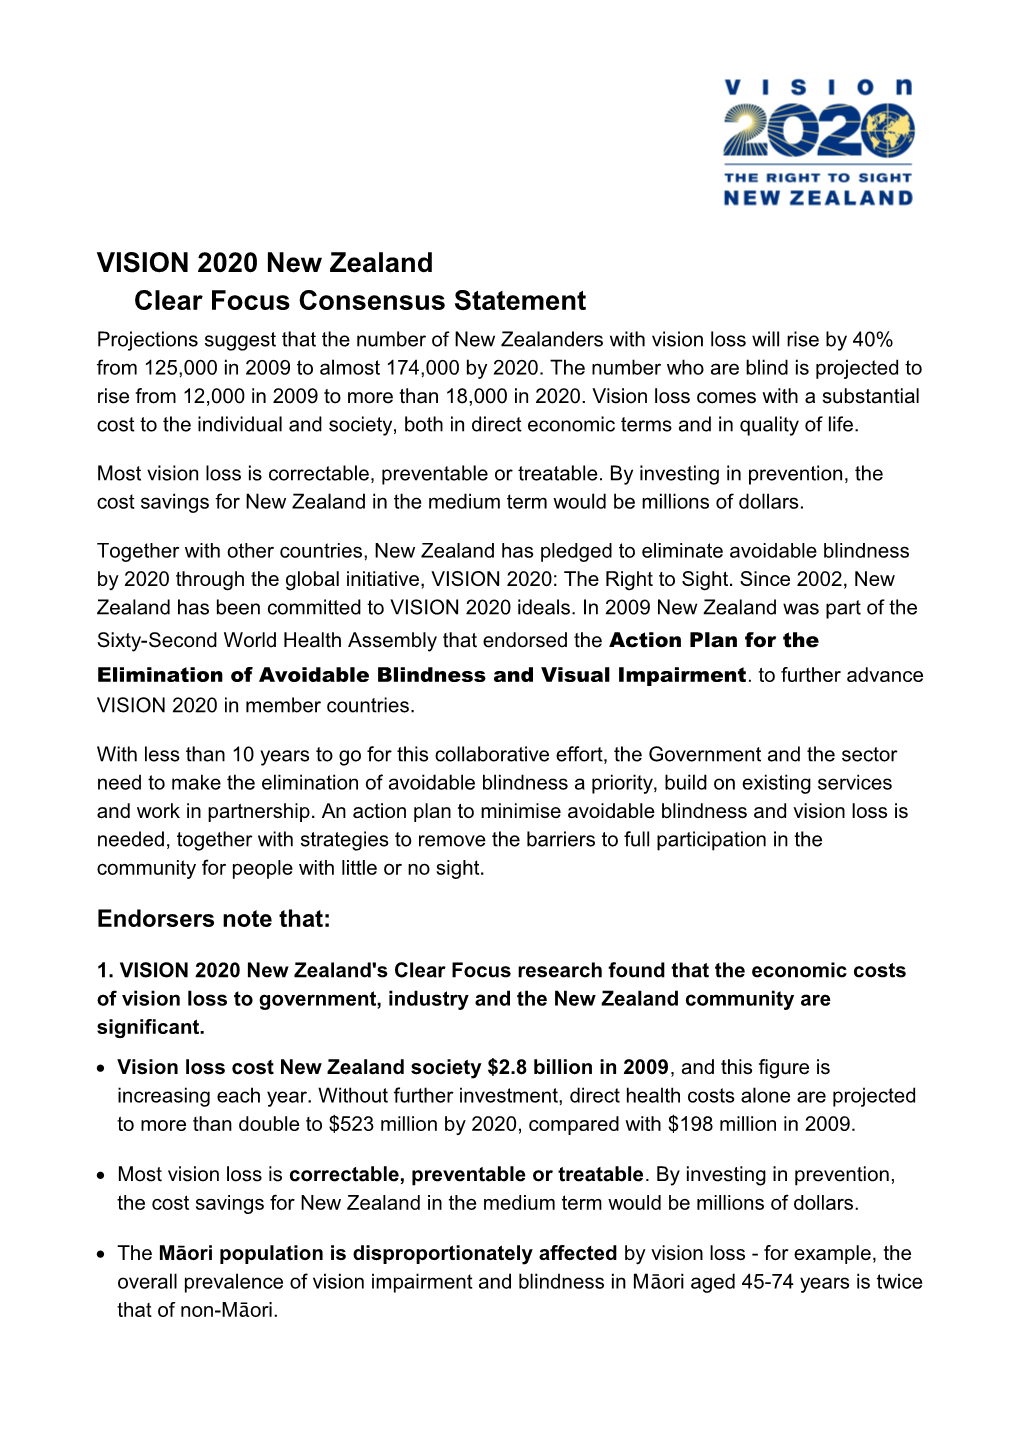 VISION 2020 New Zealand Clear Focus Consensus Statement